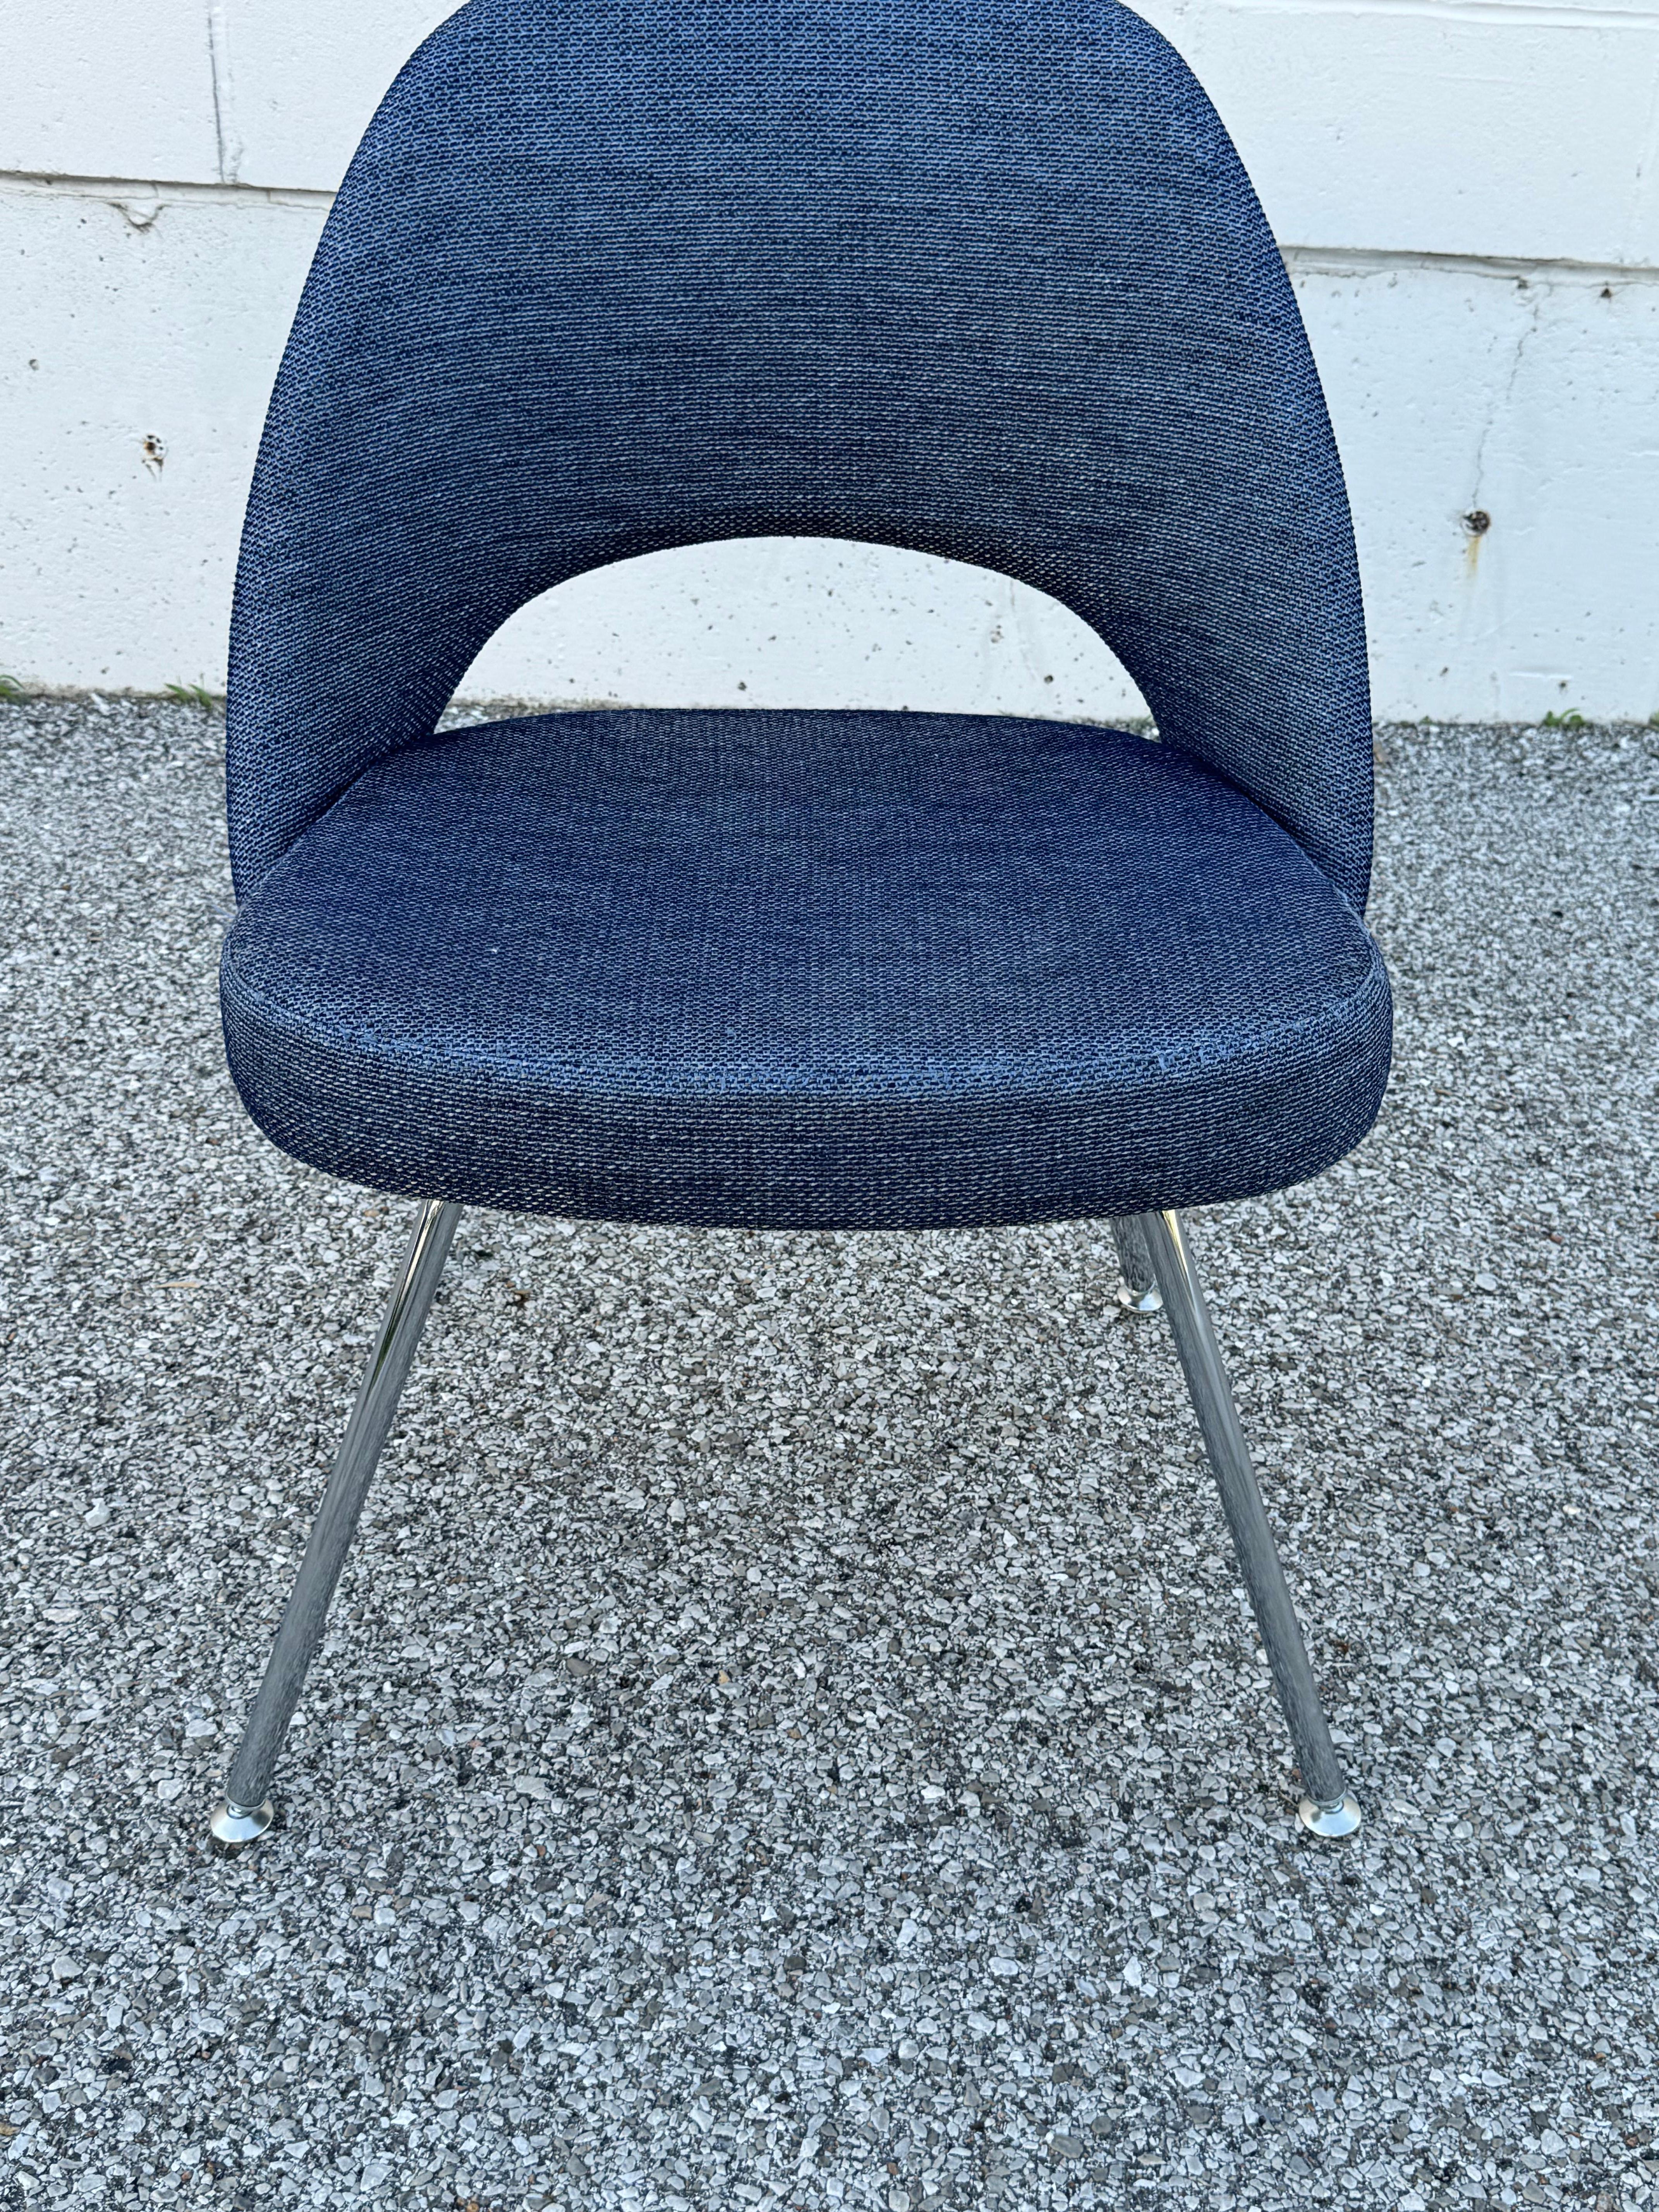 Set of 10 Eero Saarinen for Knoll 72C Executive Armless Chairs Chrome Legs *2016 In Good Condition For Sale In St. Louis, MO